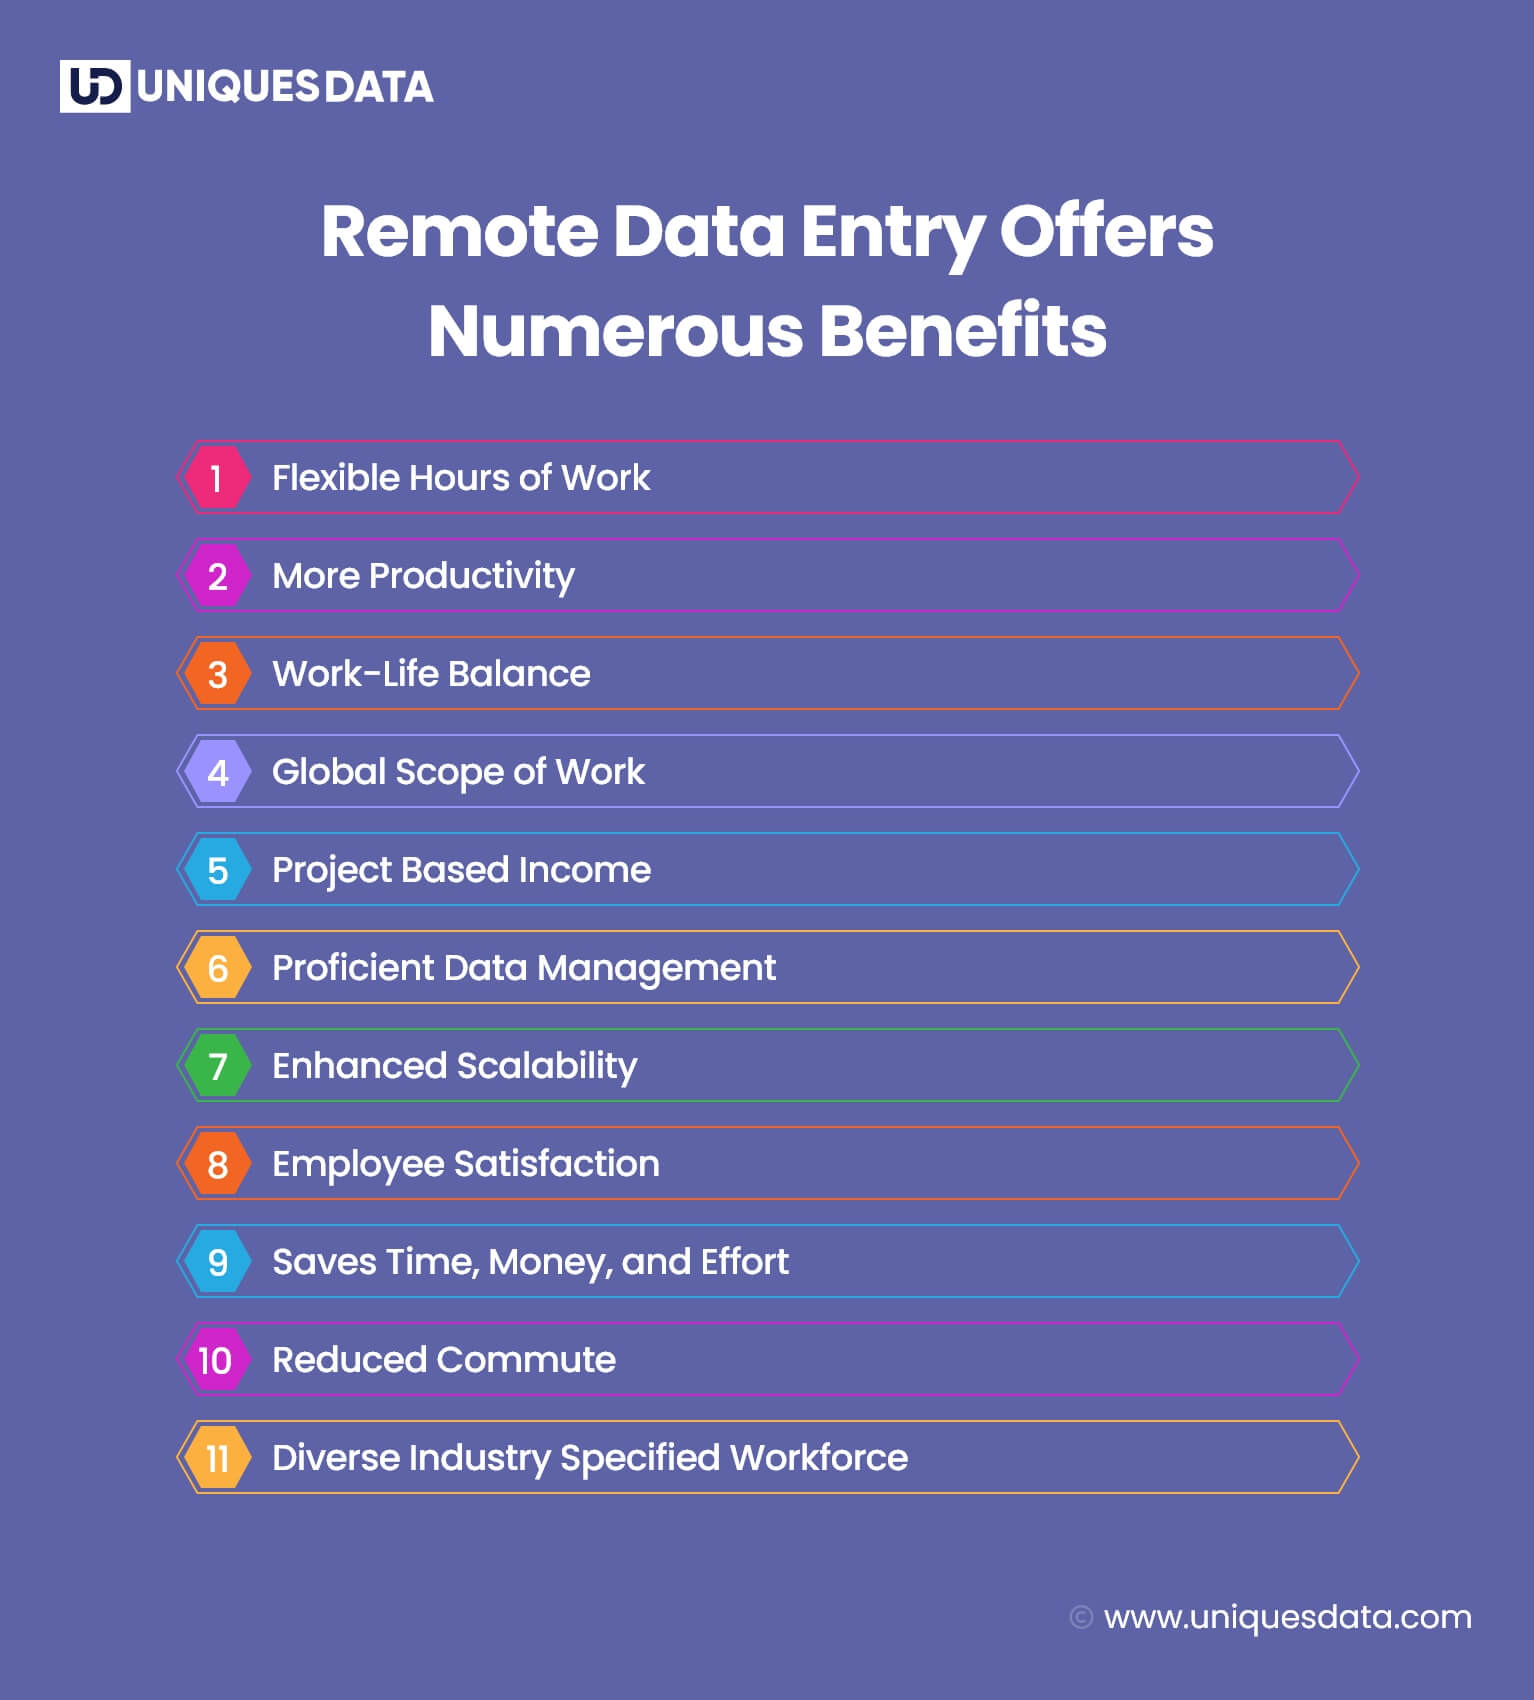 Remote Data Entry Offers Numerous Benefits